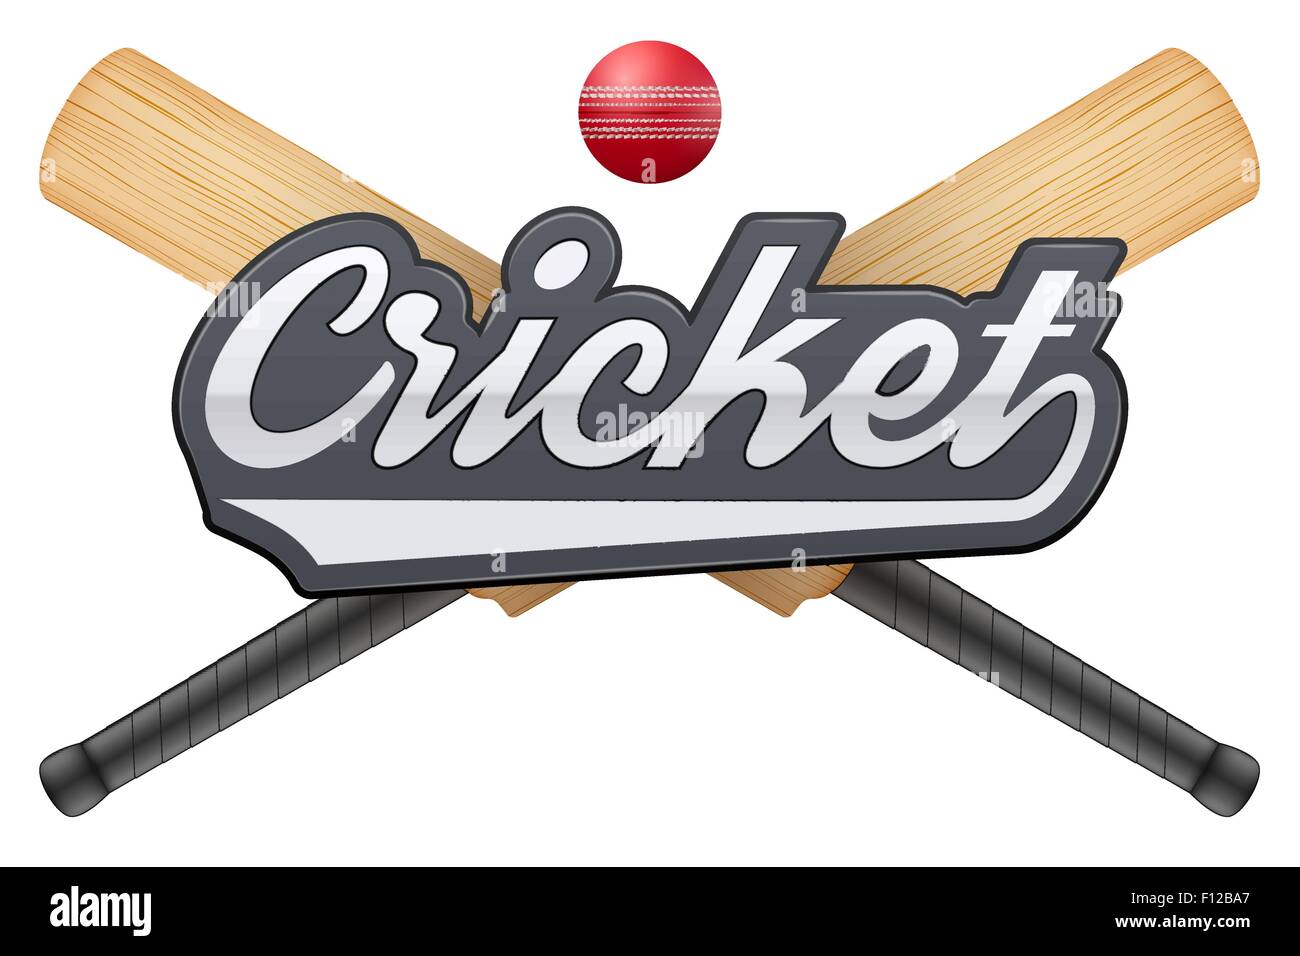 Cricket leather ball and wooden bats. Stock Vector